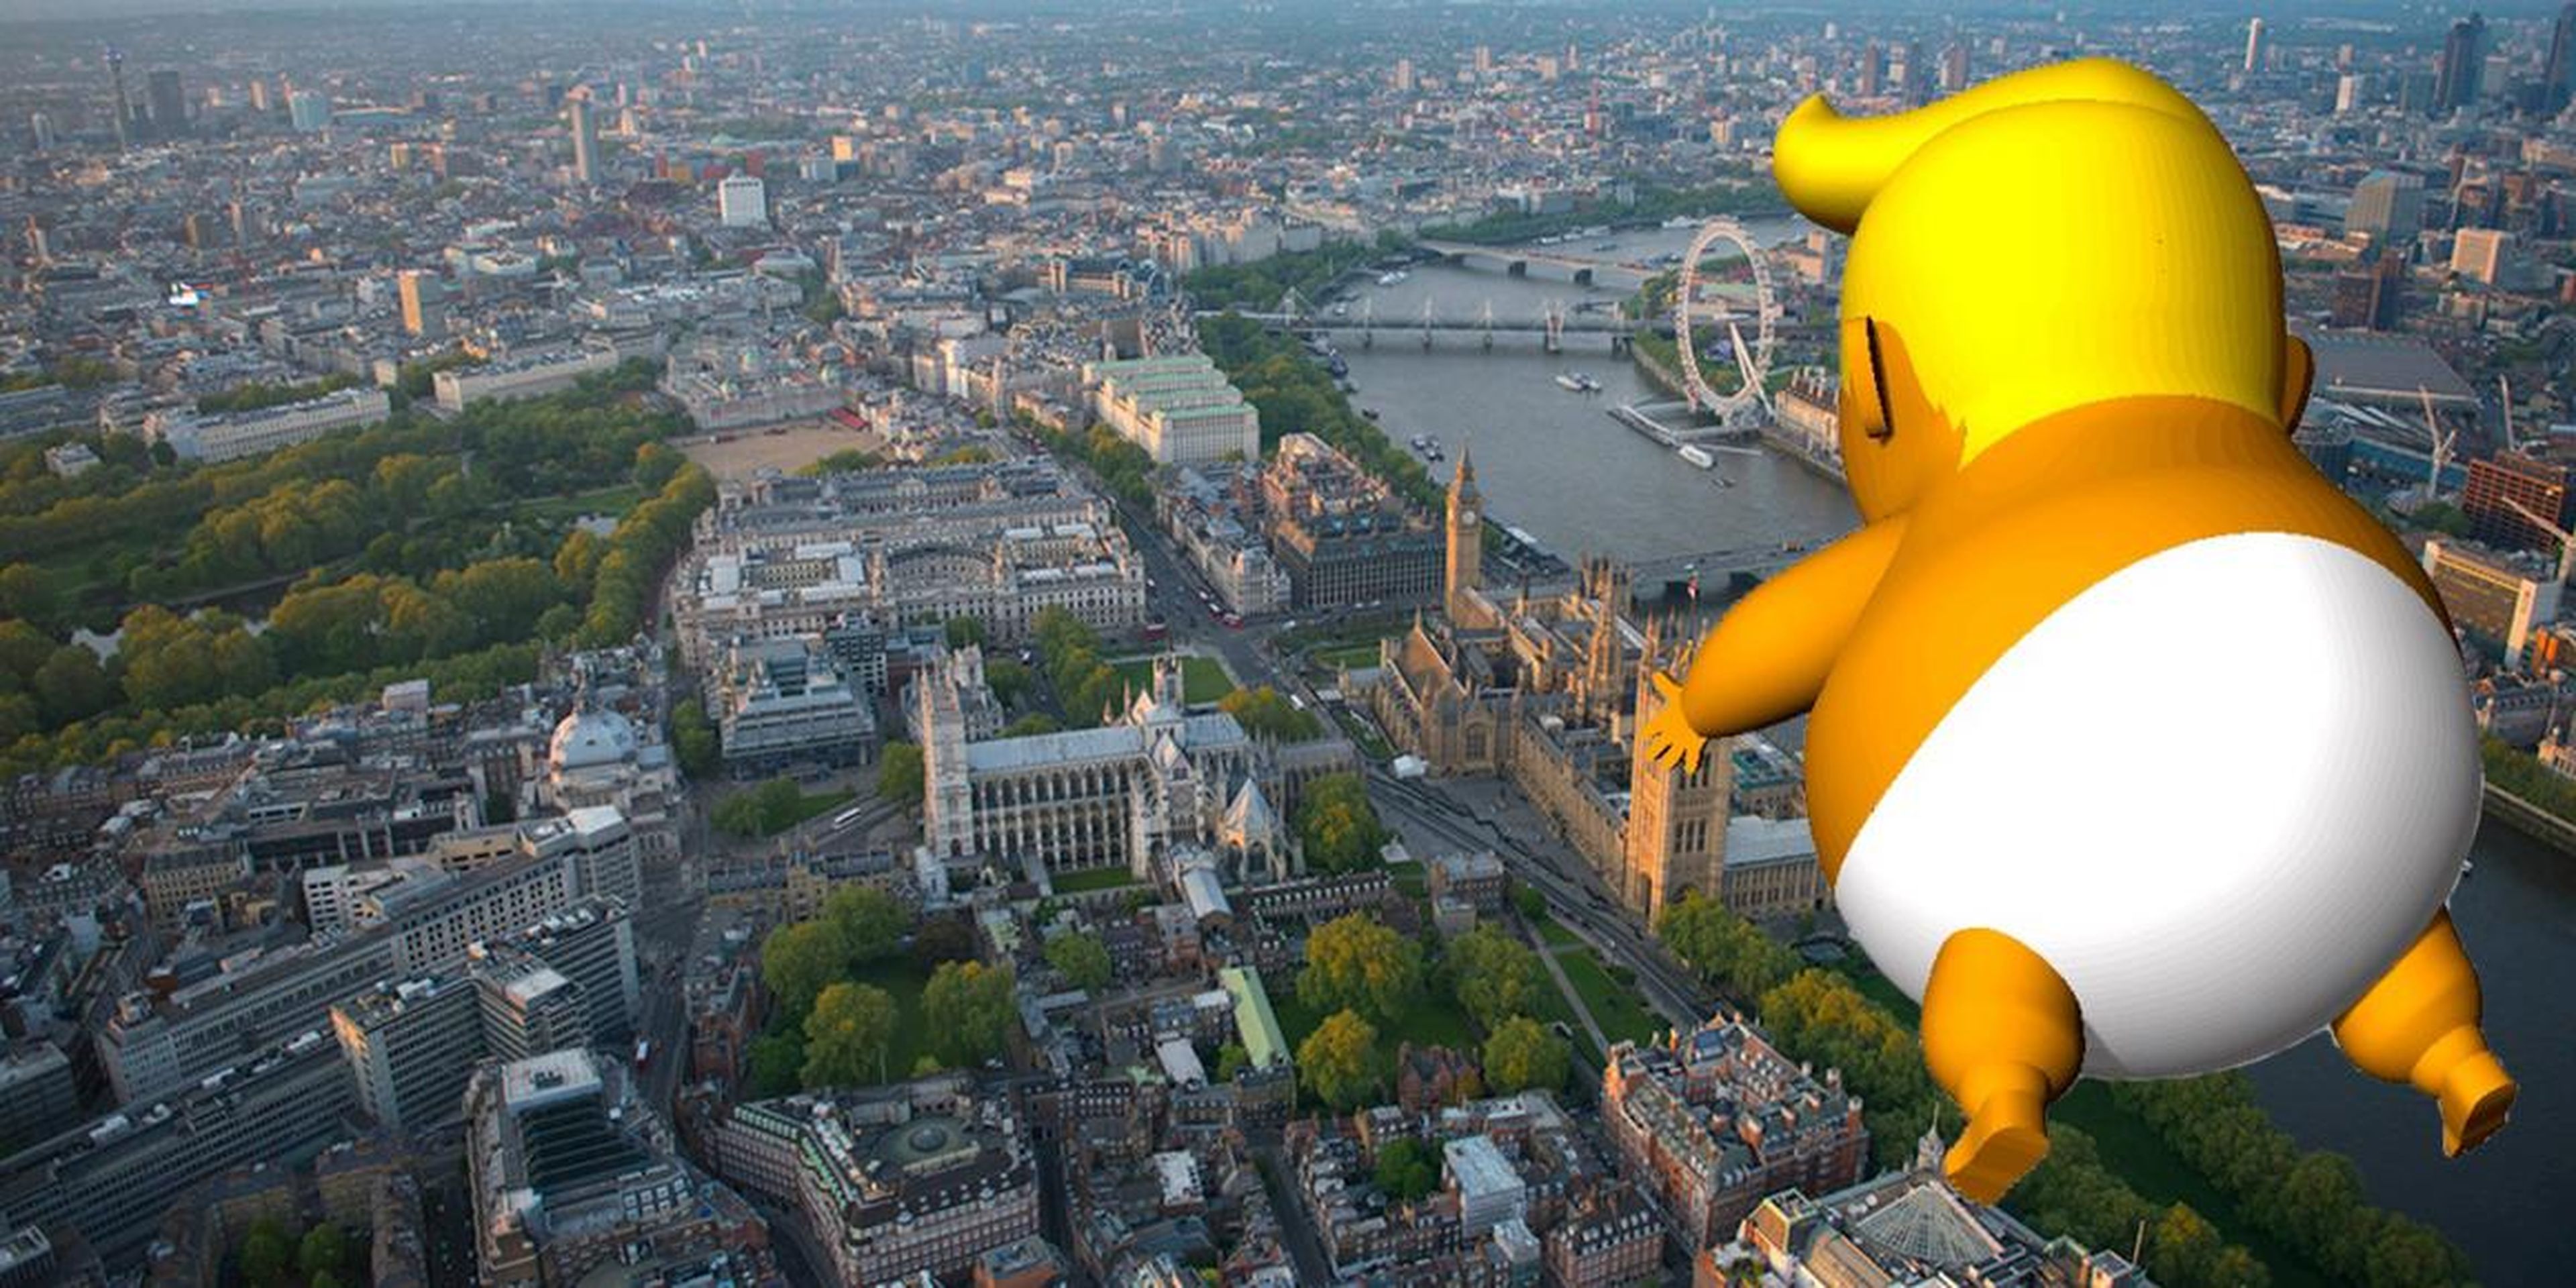 A rendering of the 20-foot-tall "Trump Baby" blimp.